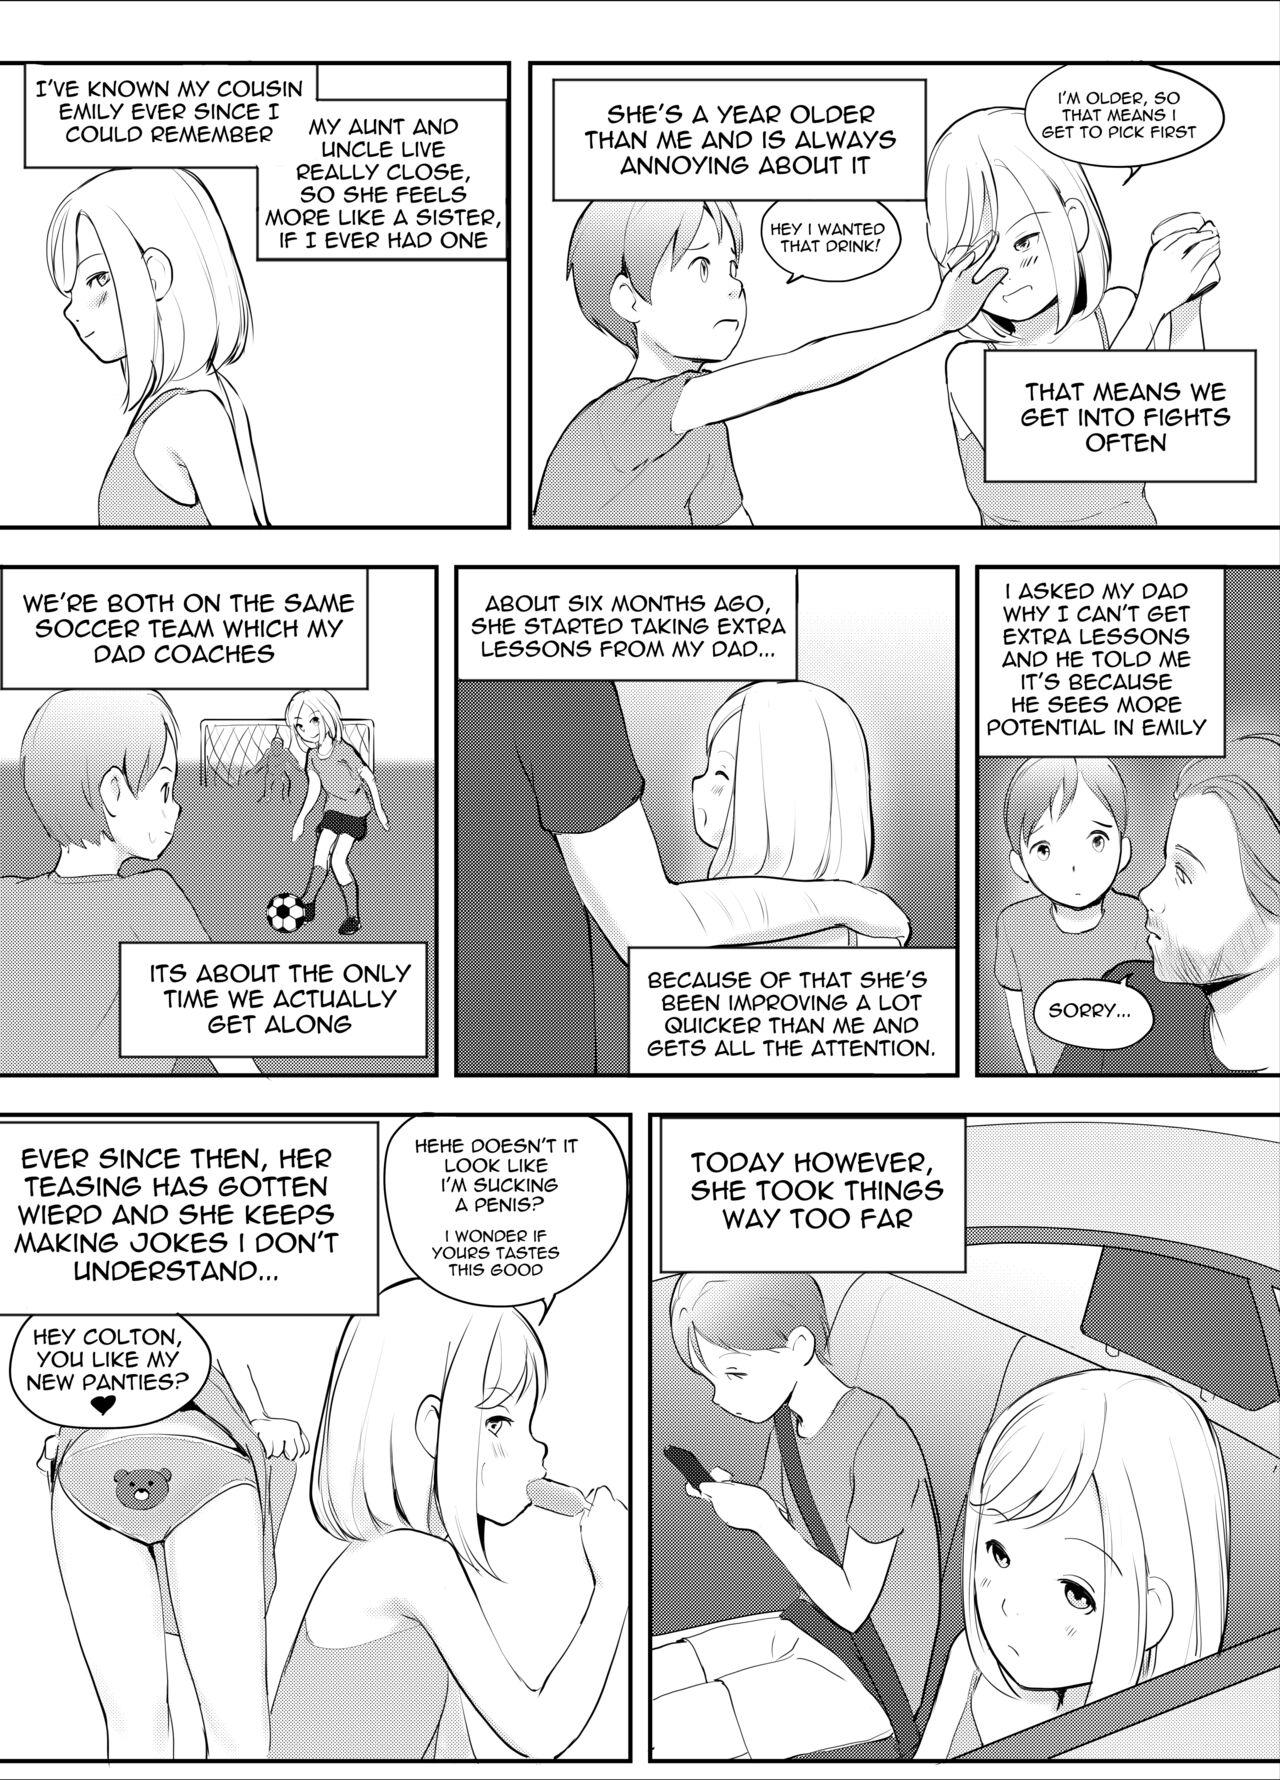 Blowjob Passing the Time - Original Fucking - Page 2